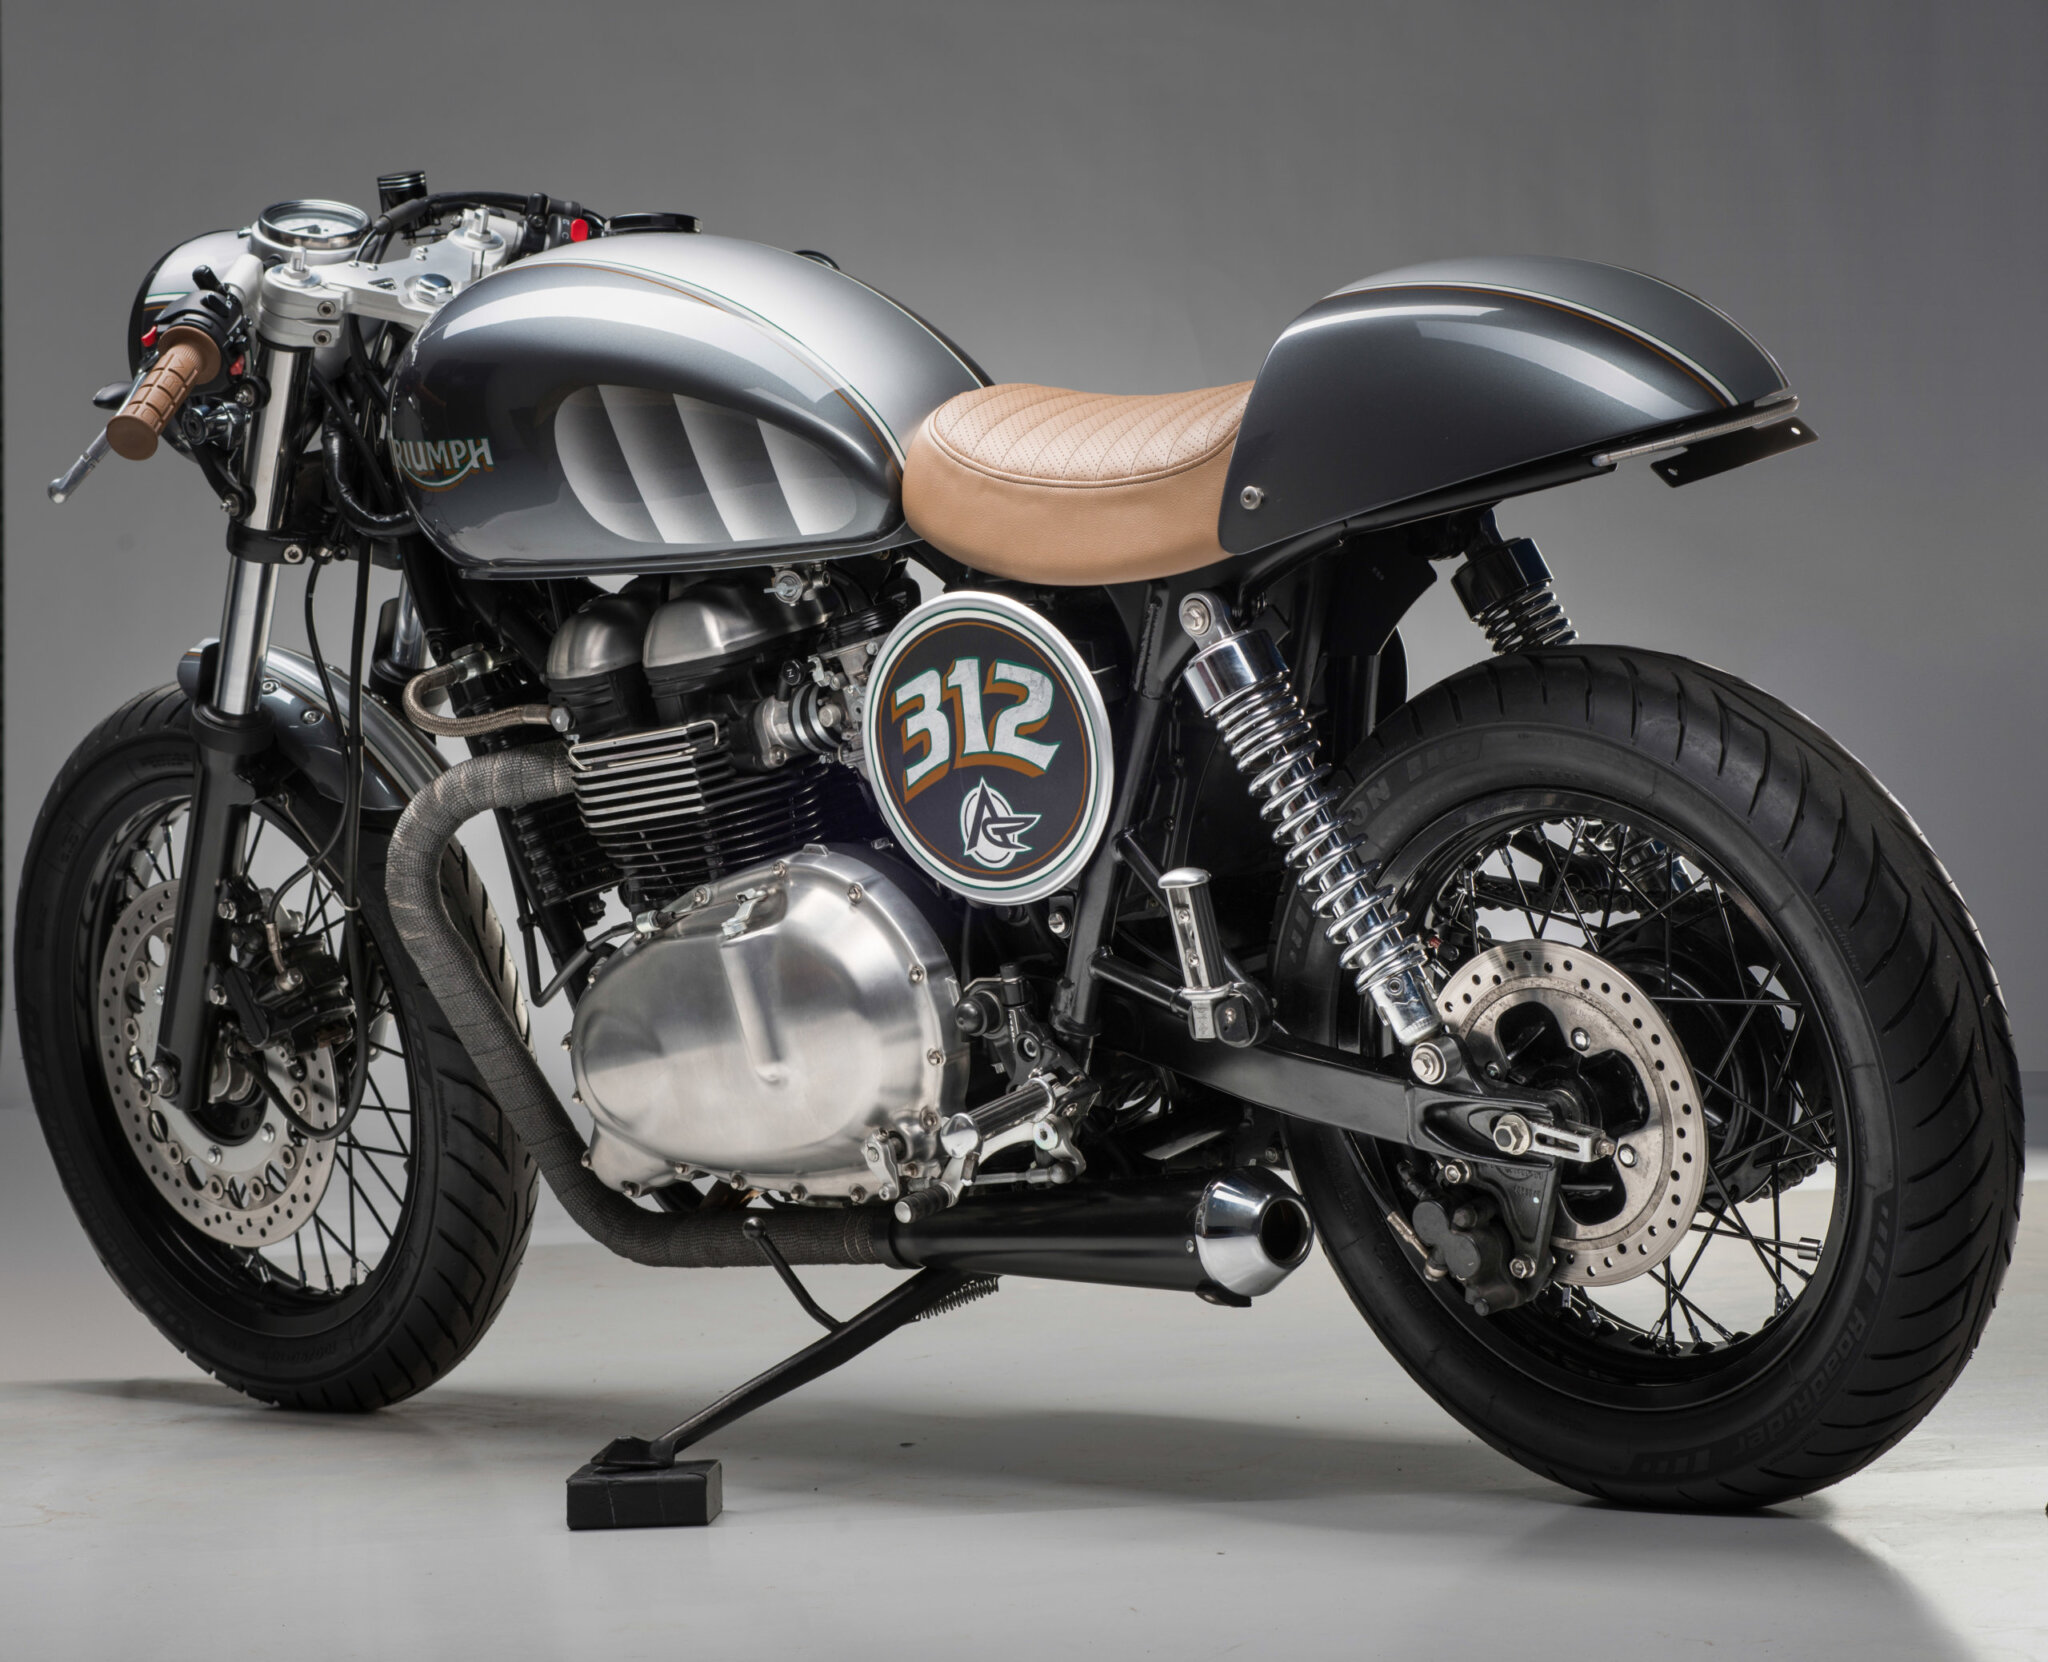 https://www.analogmotorcycles.com/wp-content/uploads/2015/01/3t_0001-3-scaled.jpg